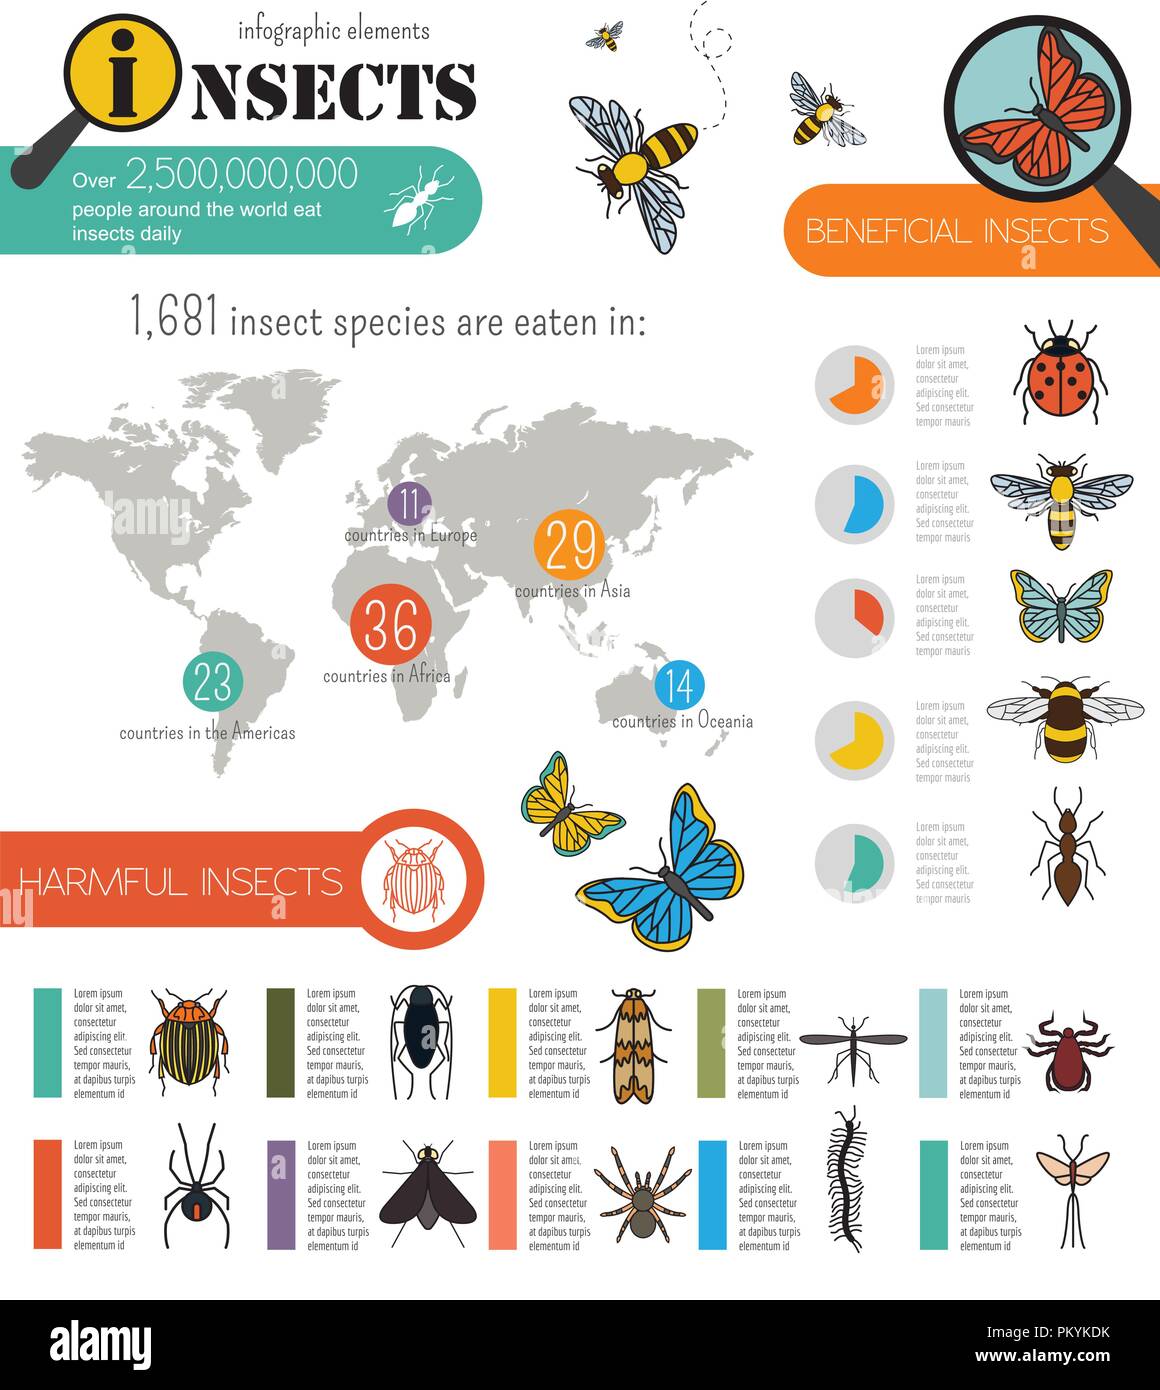 Insects infographic template. Vector illustration Stock Vector